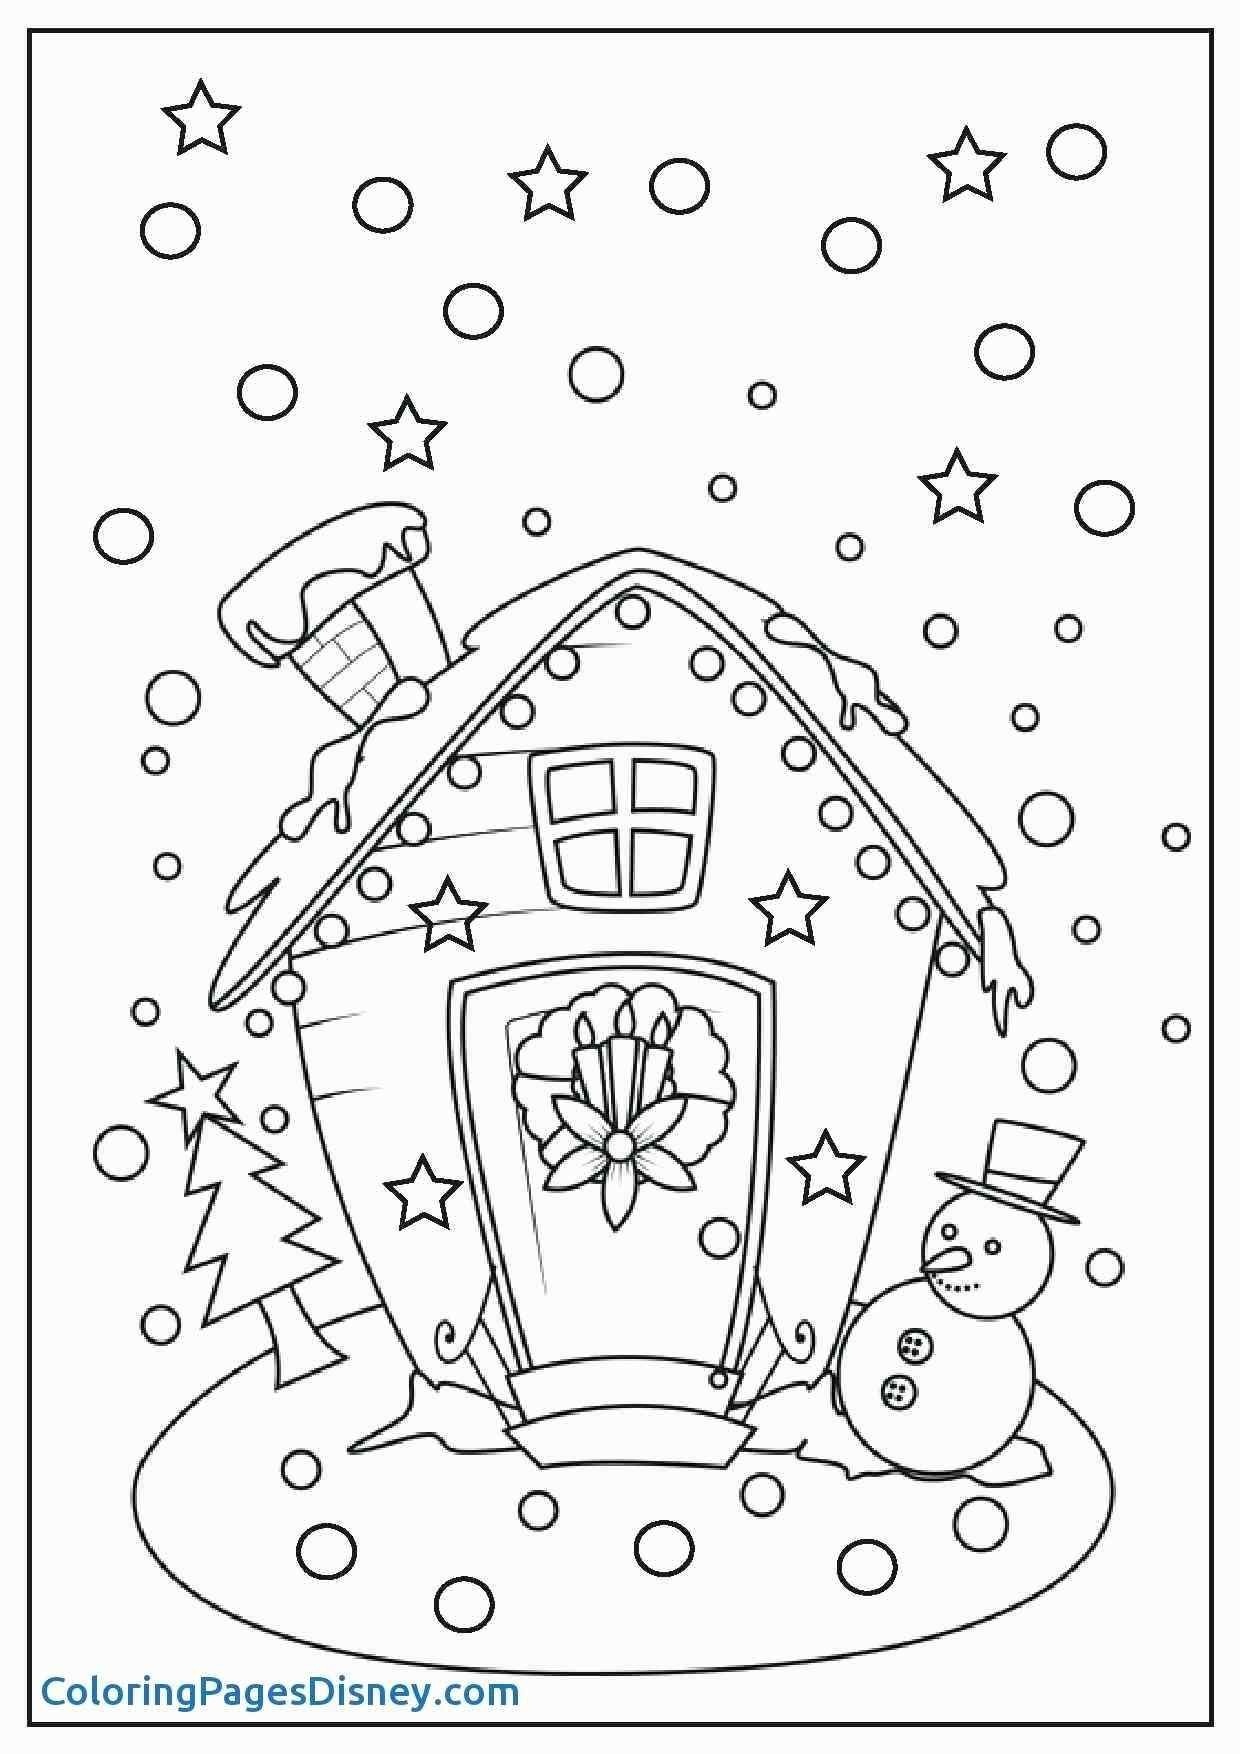 Free Patterns For Stained Glass Unique Printable Castle Template - Free Printable Castle Templates